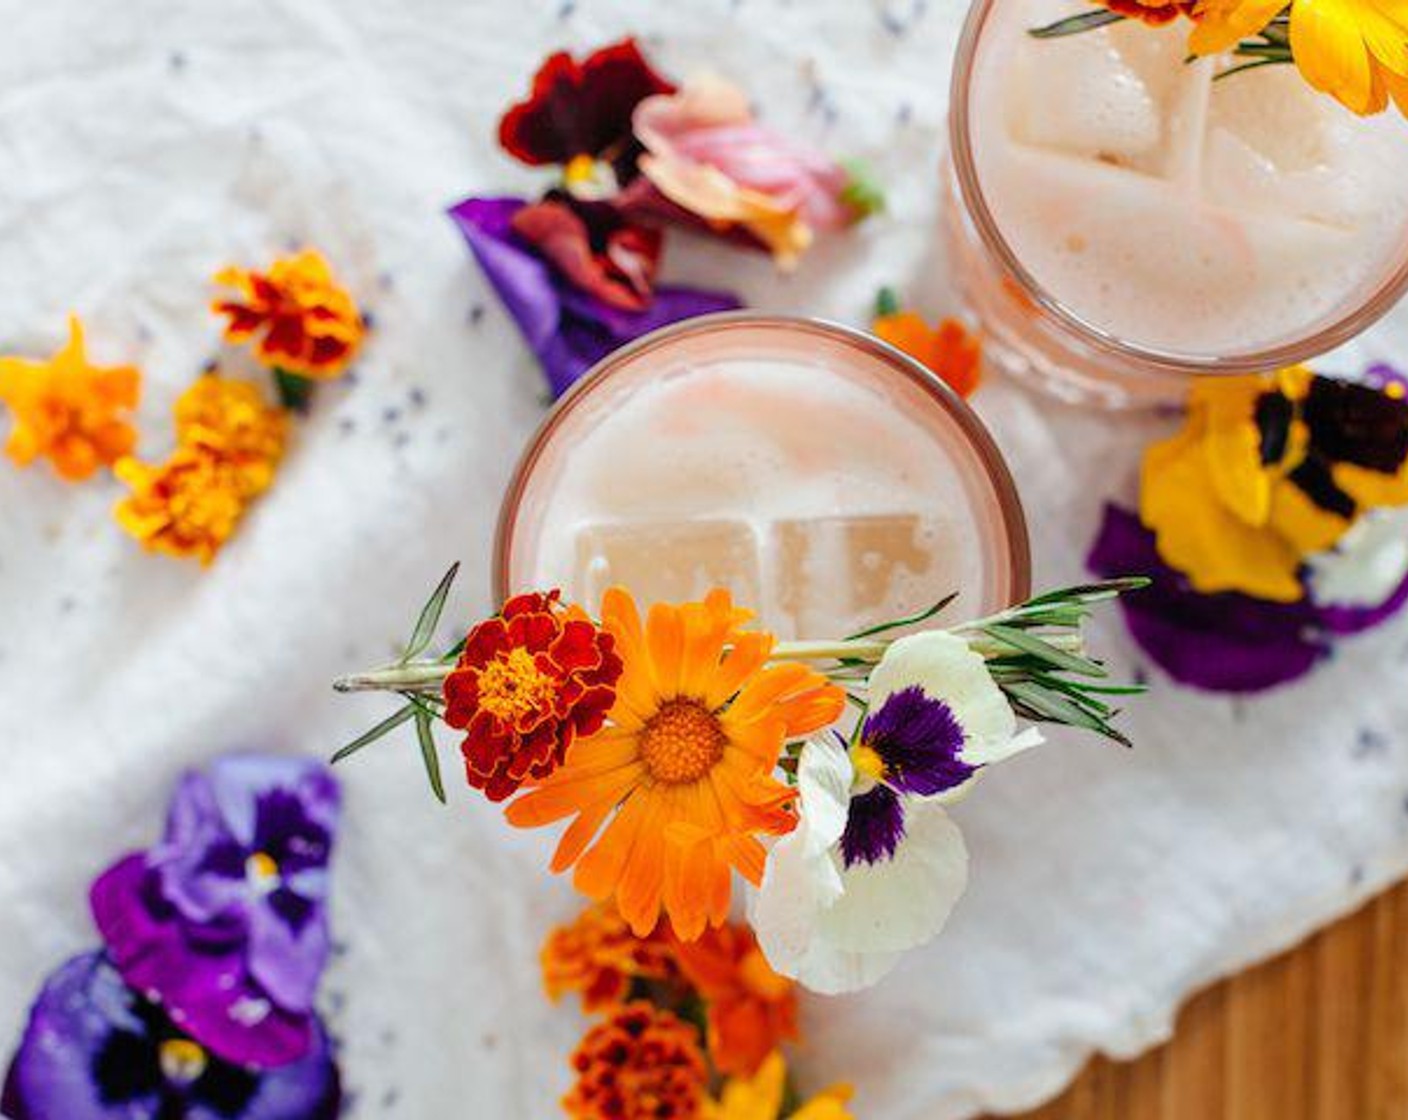 step 1 Shake Whiskey (1.5 fl oz), Almond Milk (3 fl oz), Lavender Extract (1 dash) and Simple Syrup (1 Tbsp) in a shaker for 15 seconds. Pour into glass and add ice. Garnish with Edible Flowers (to taste), Peychaud's Bitters (1 dash) and Fresh Rosemary (1 sprig).